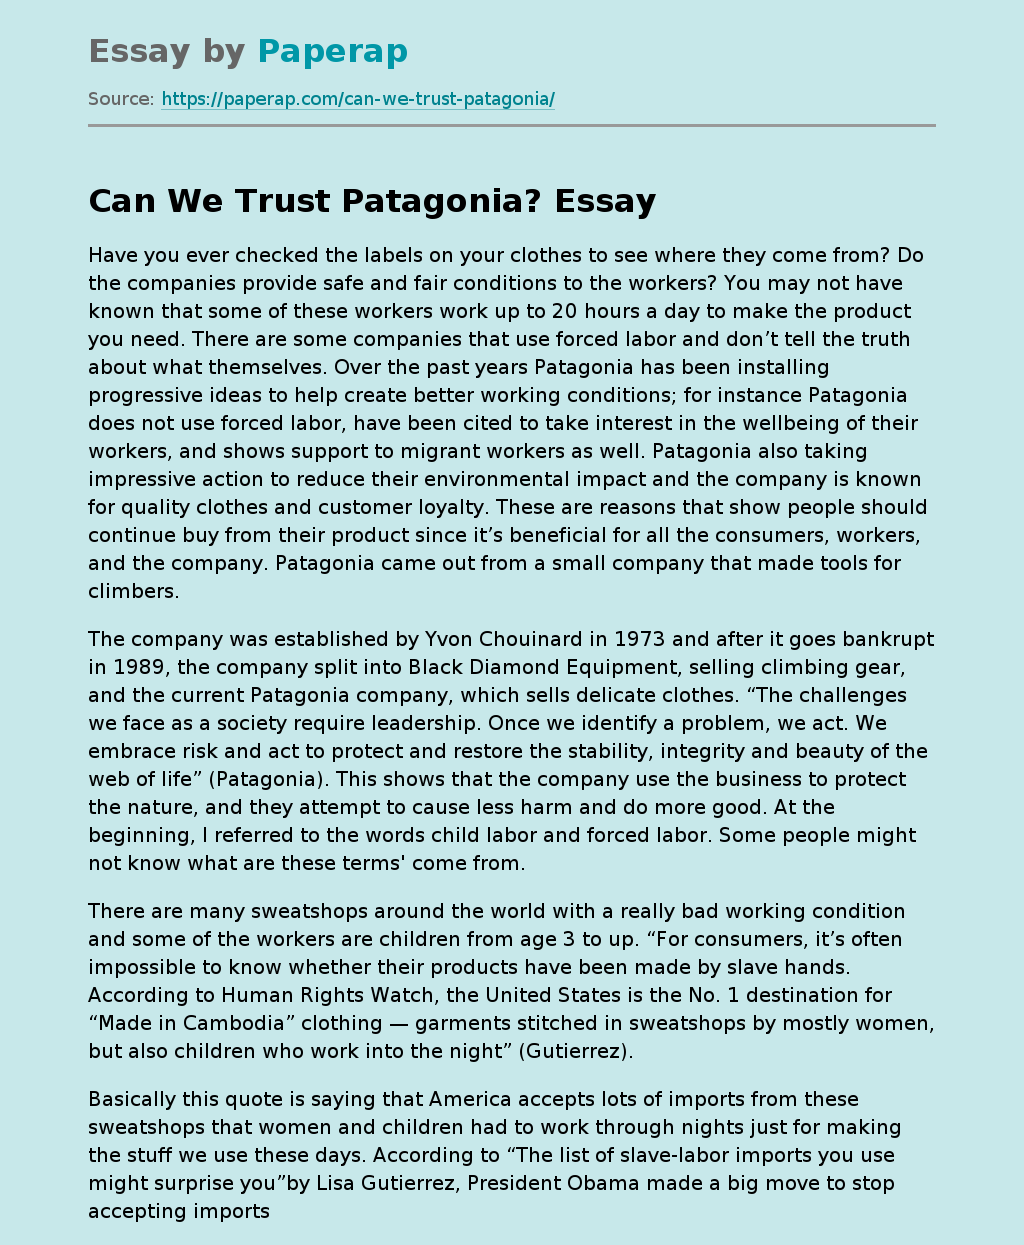 Can We Trust Patagonia?